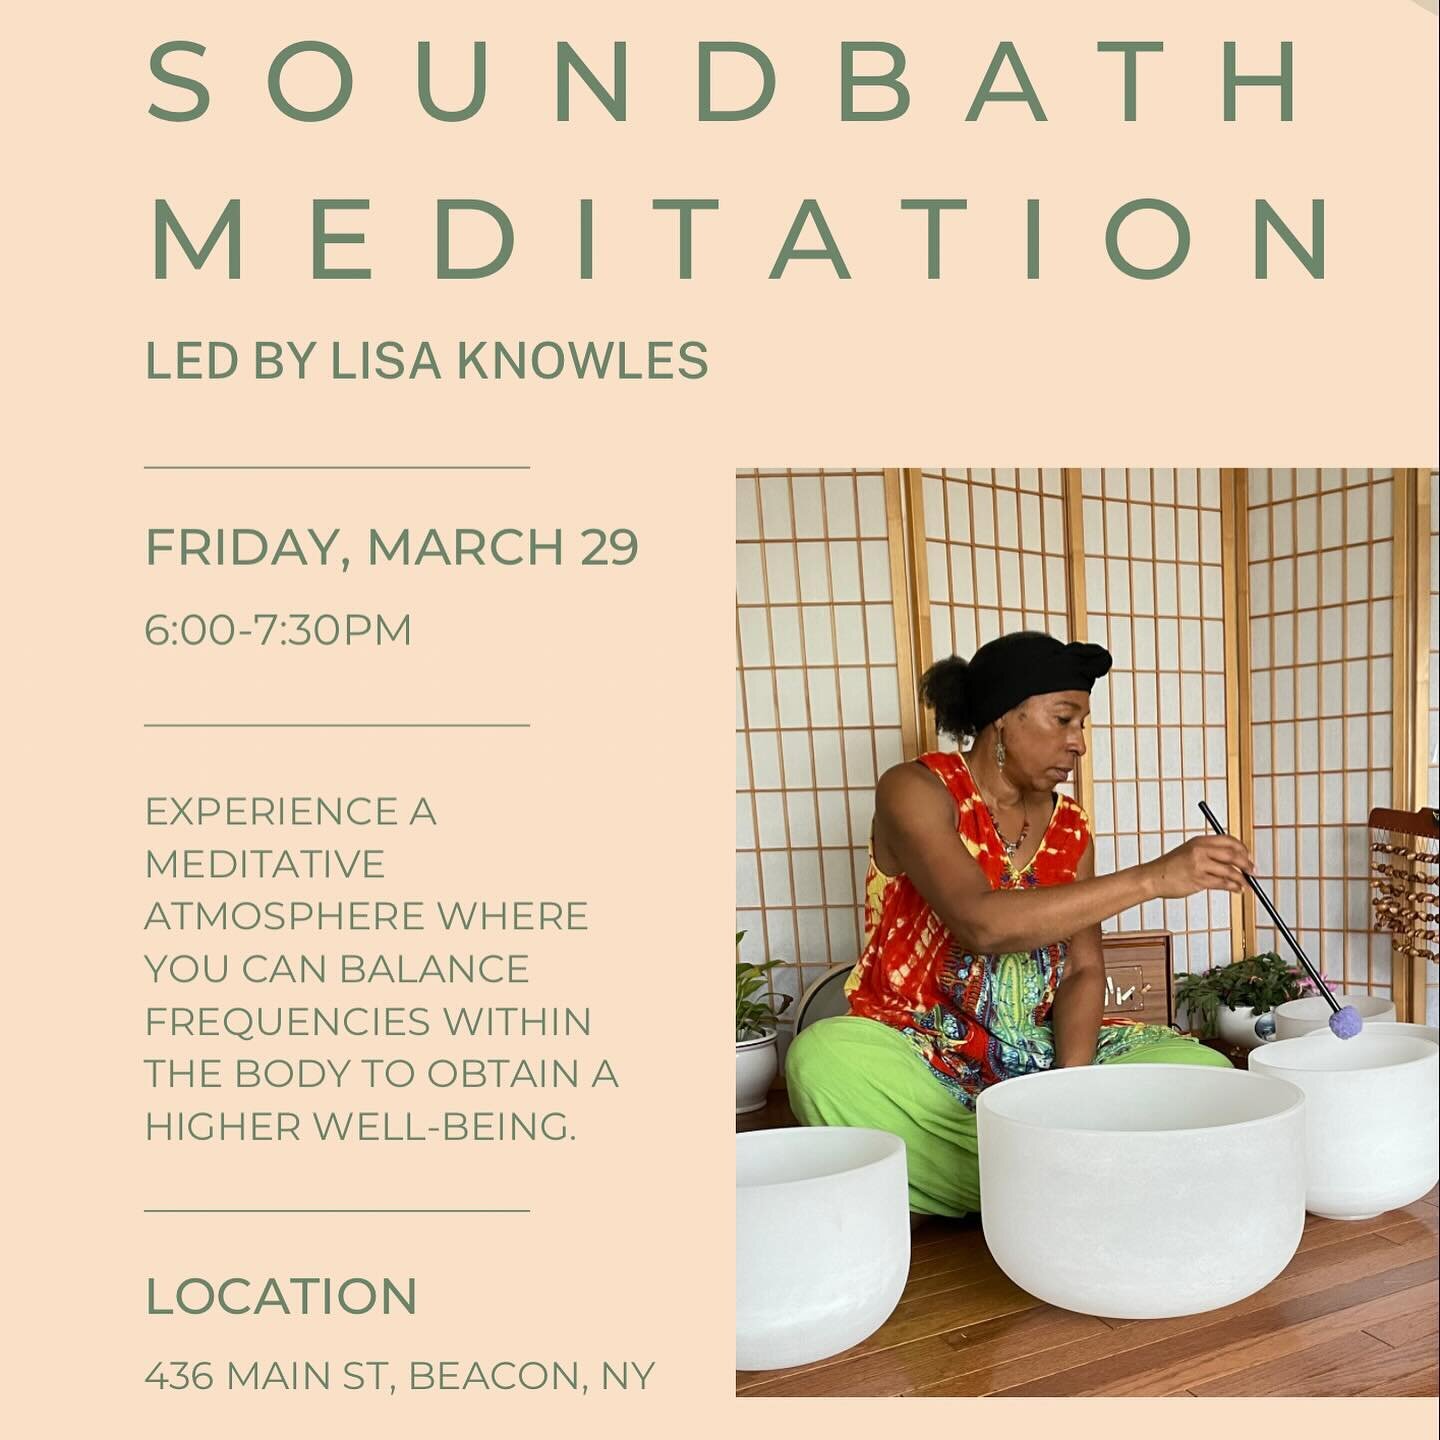 Fri 3/29 Join us for a Sound Bath Meditation 

Release stagnant energy and achieve inner harmony at our upcoming sound bath this Friday, 3/29 6-7:30pm at 436 Main St in Beacon, NY. 

Space is limited. Reserve your spot at link in bio.